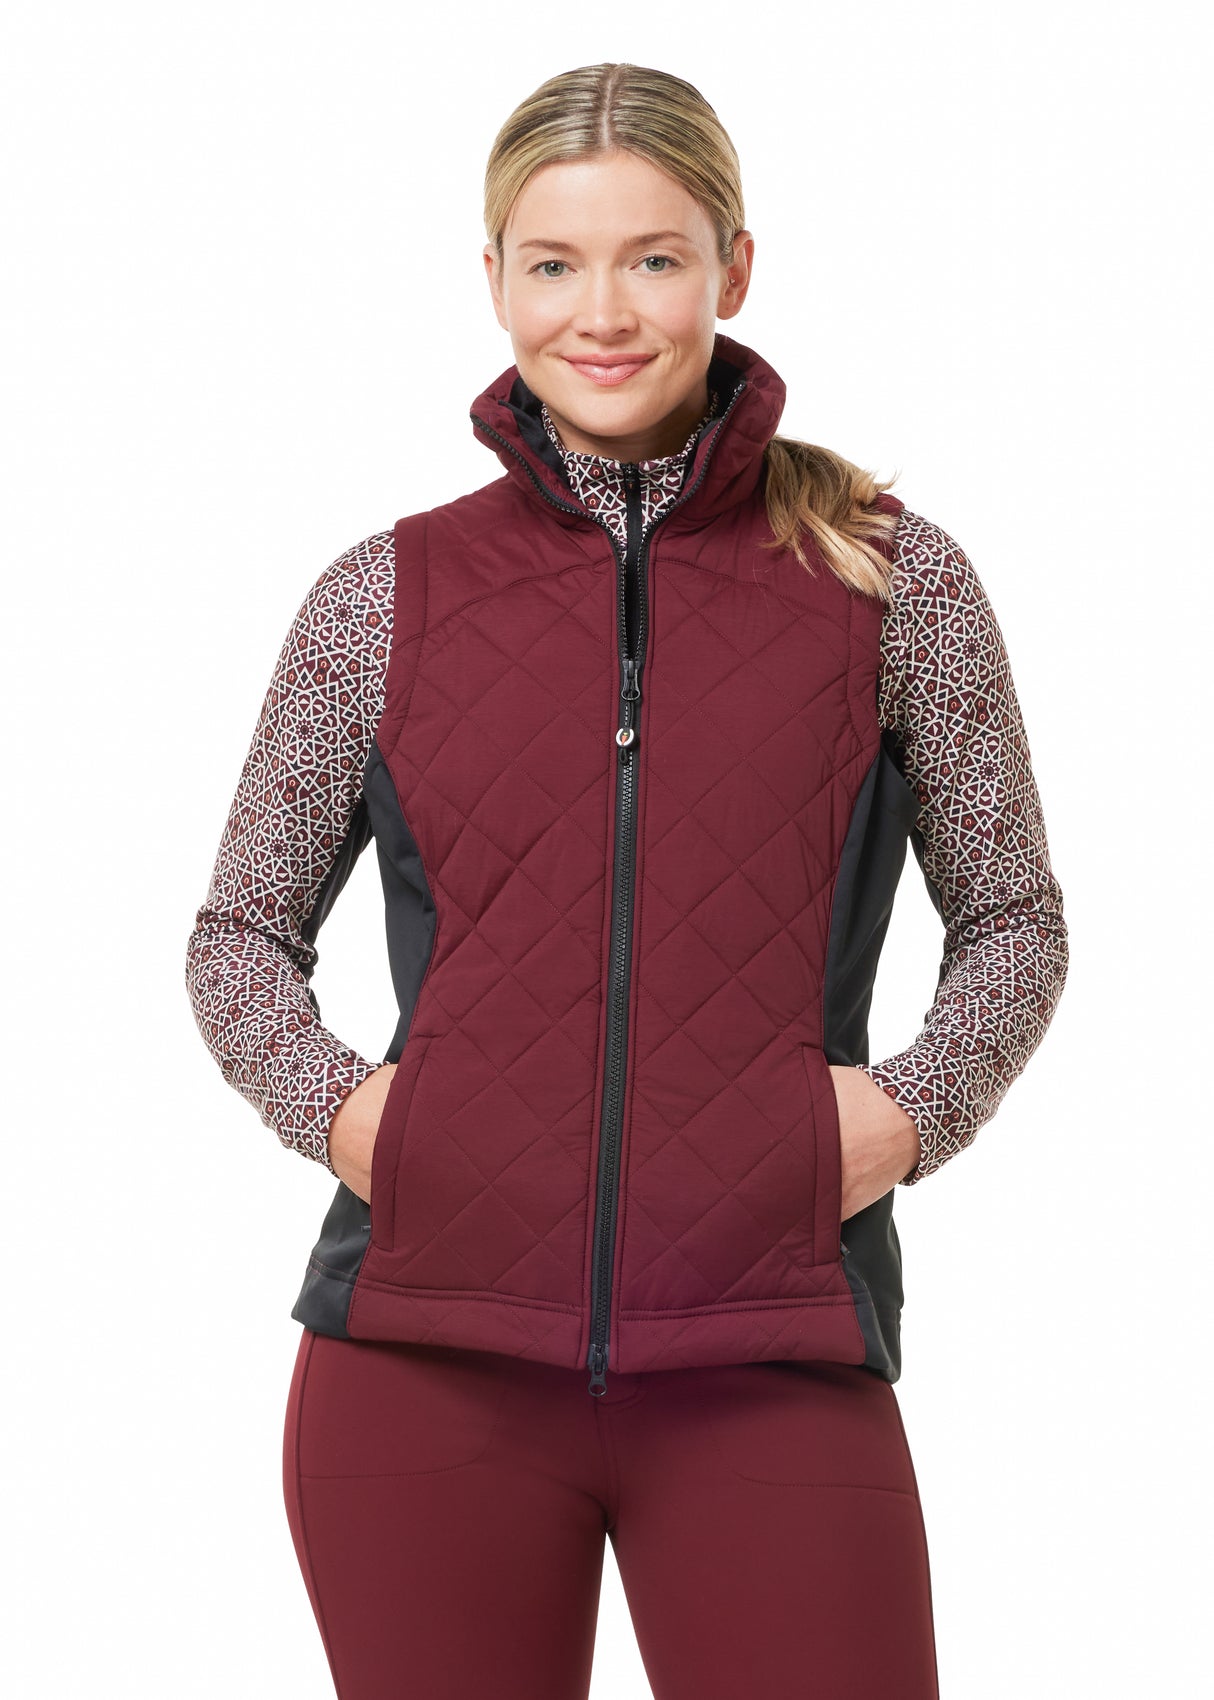 KERRITS FULL MOTION QUILTED VEST - SOLID